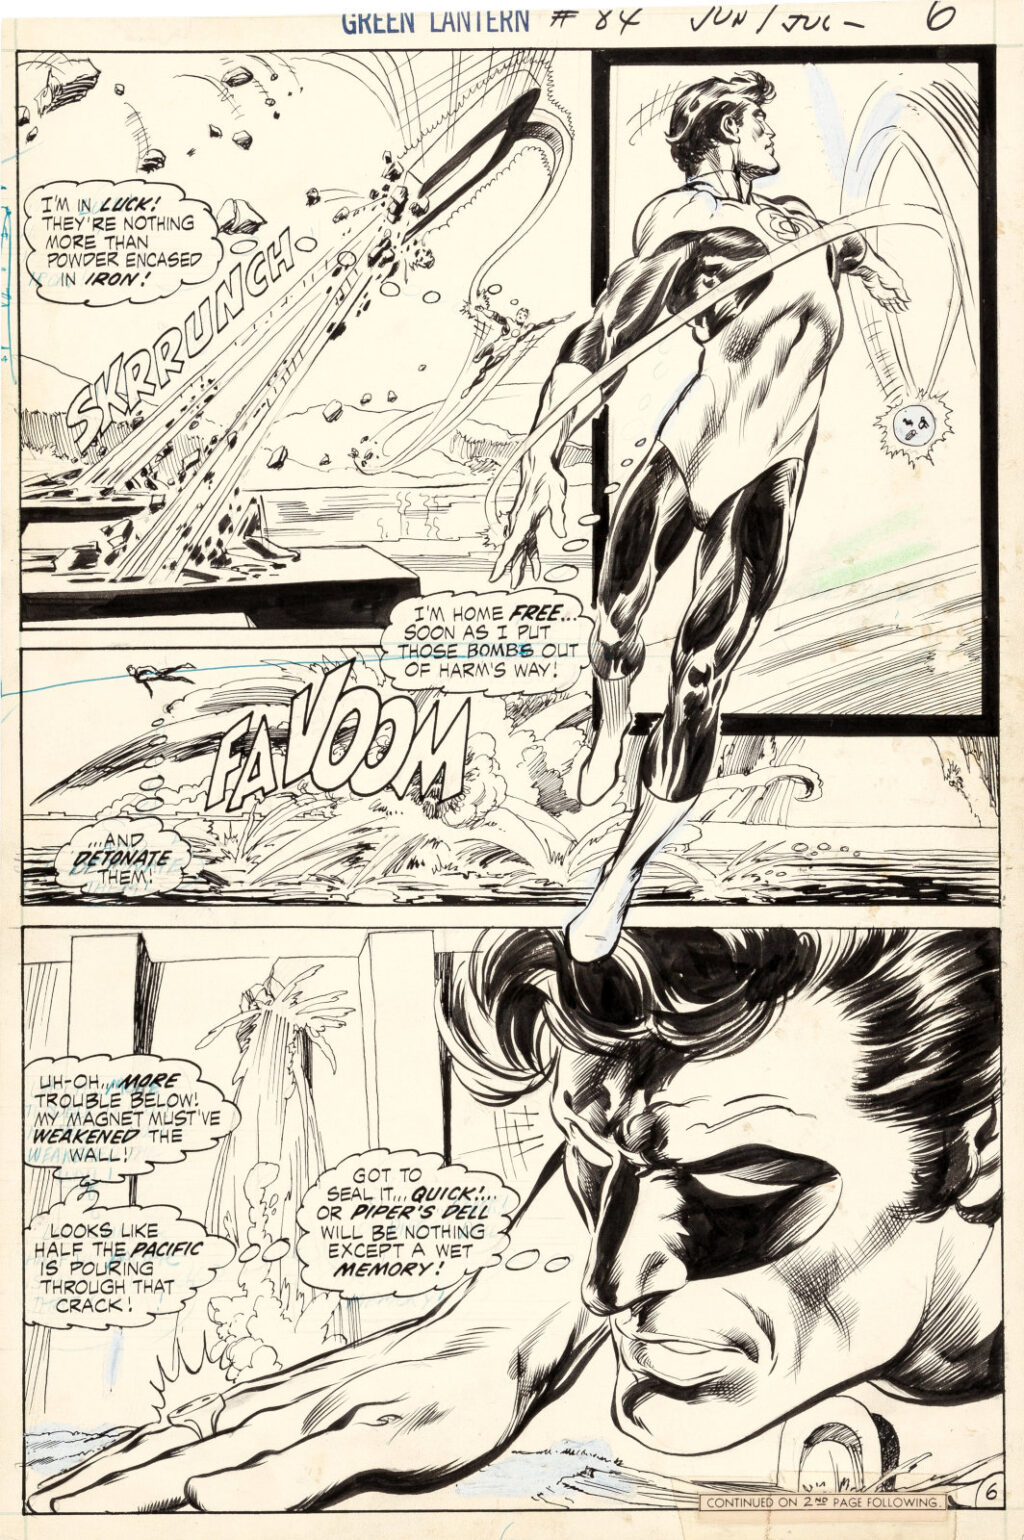 Green Lantern issue 84 page 6 by Neal Adams and Bernie Wrightson